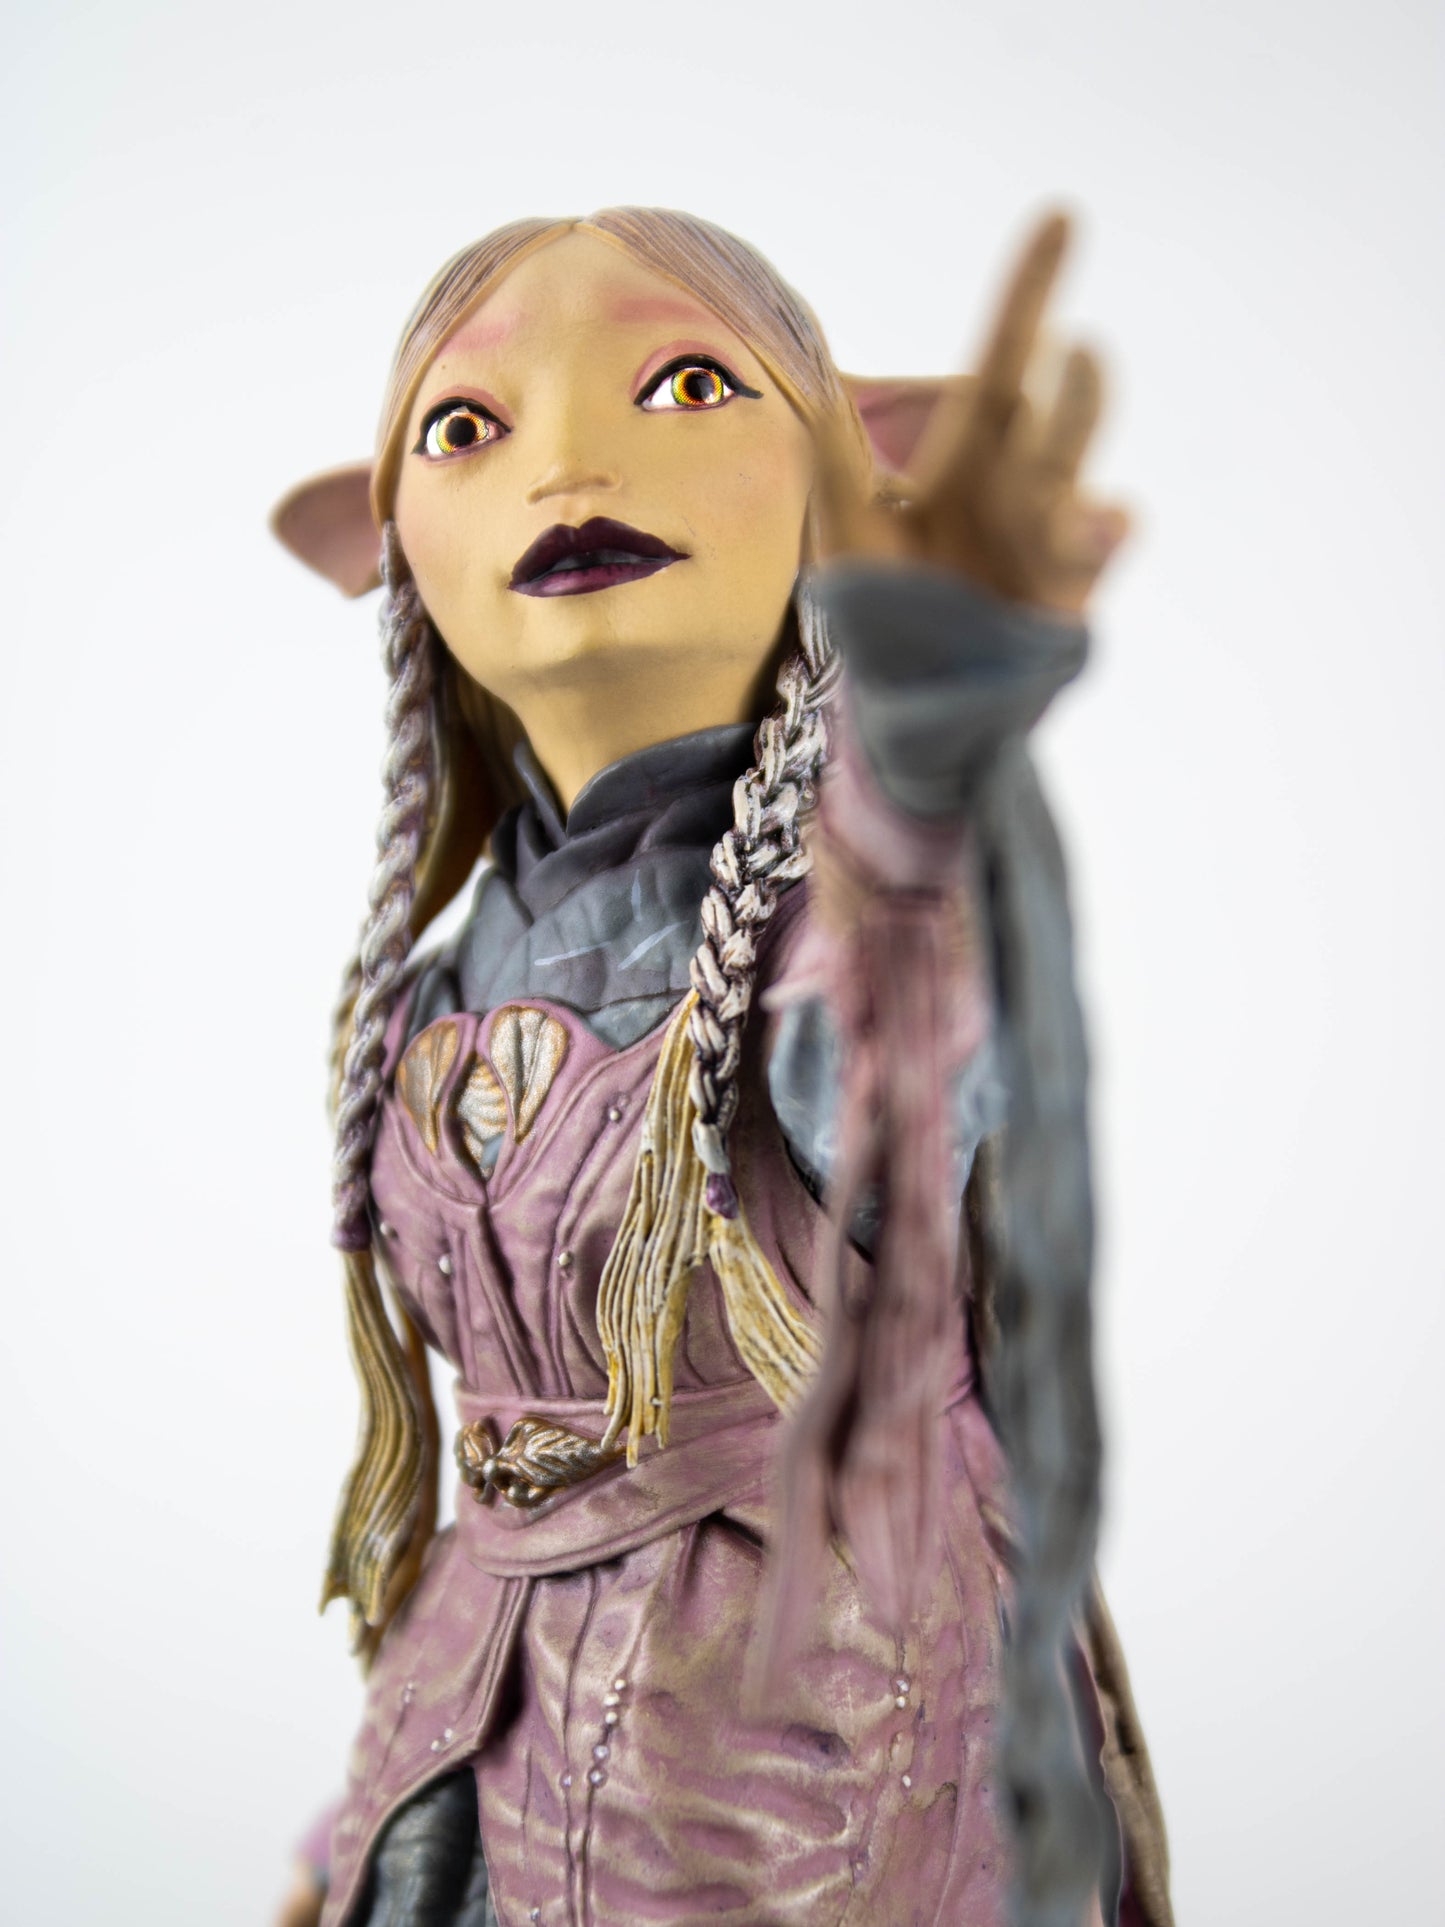 Brea The Gelfling (The Dark Crystal: Age of Resistance) 1:6 Scale Statue